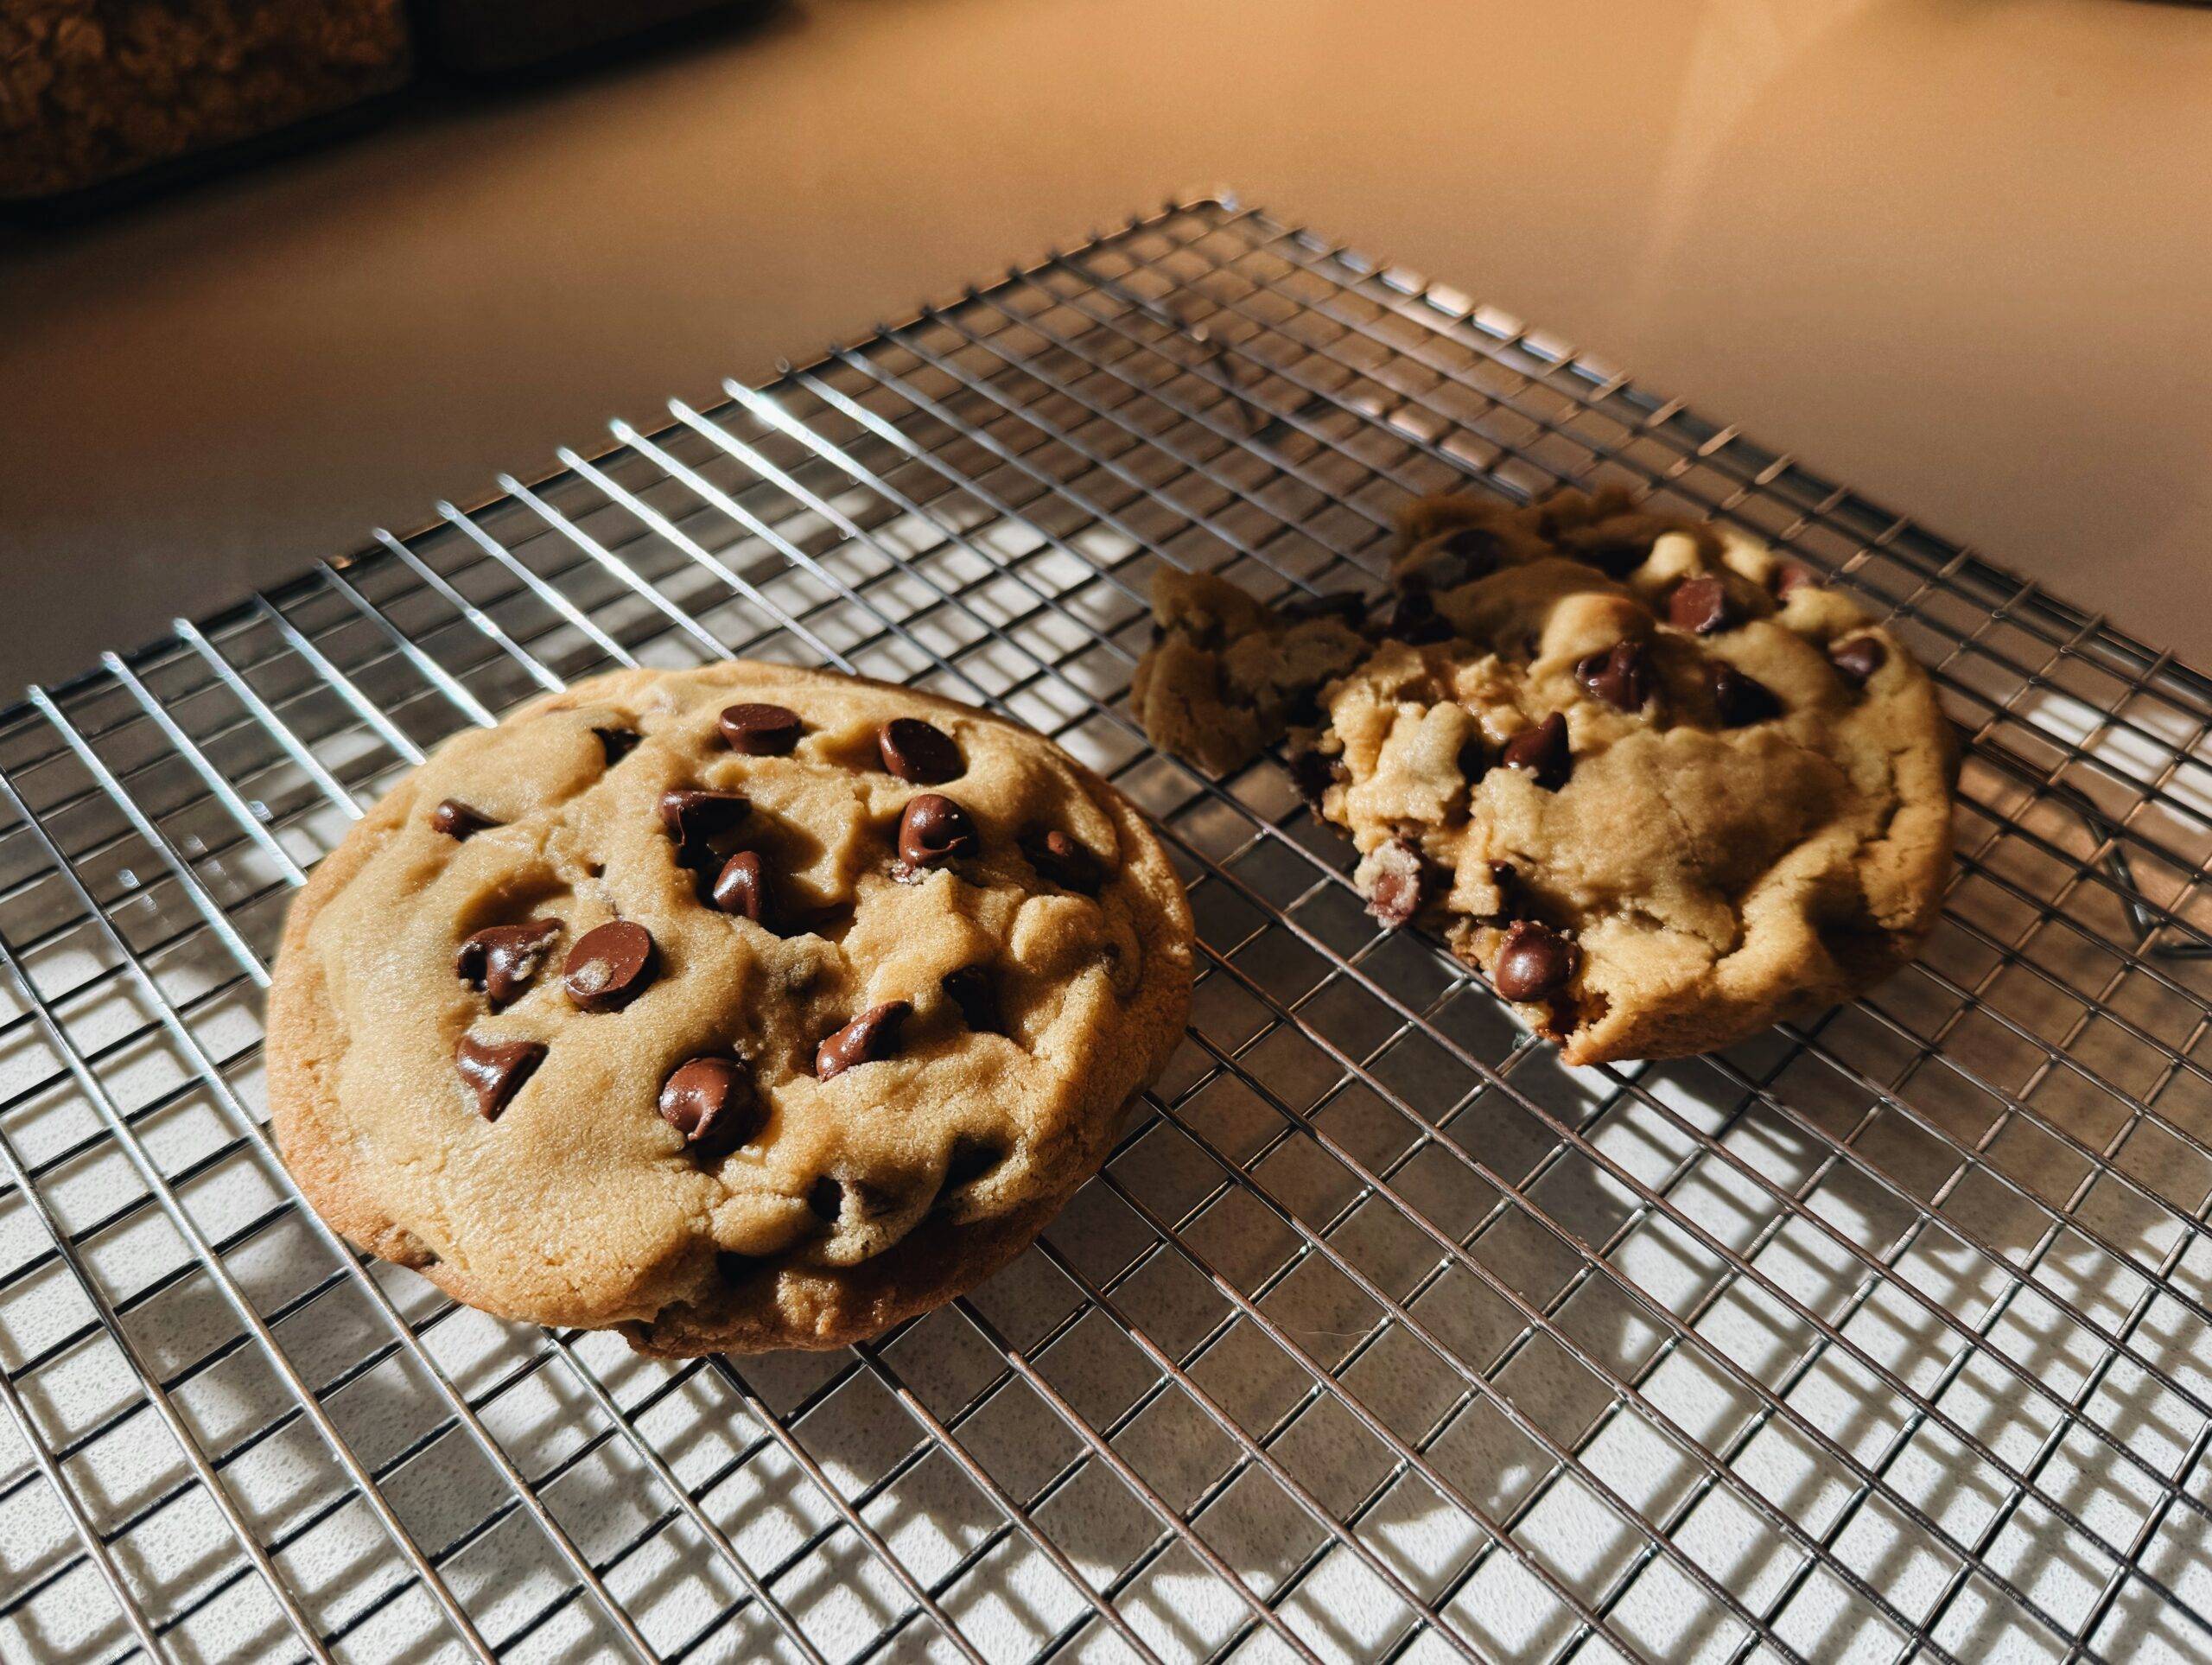 Cookies cooling on a cooling rack.